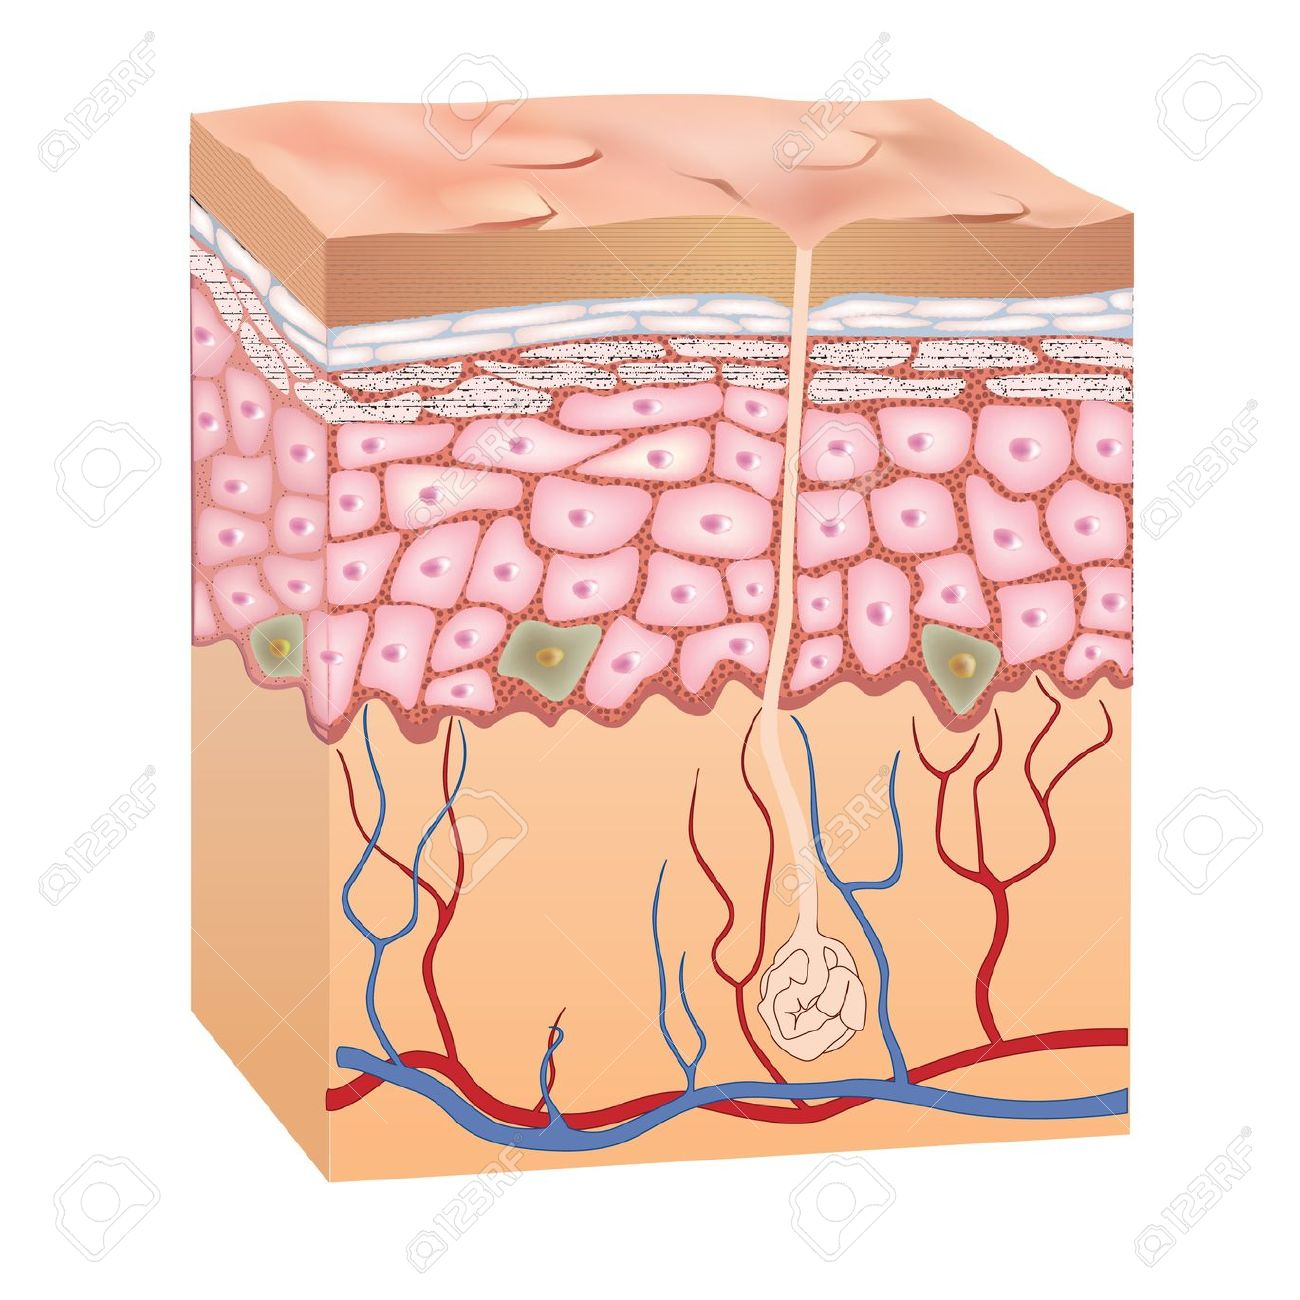 Body clipart skin. Humane tissue structure layers